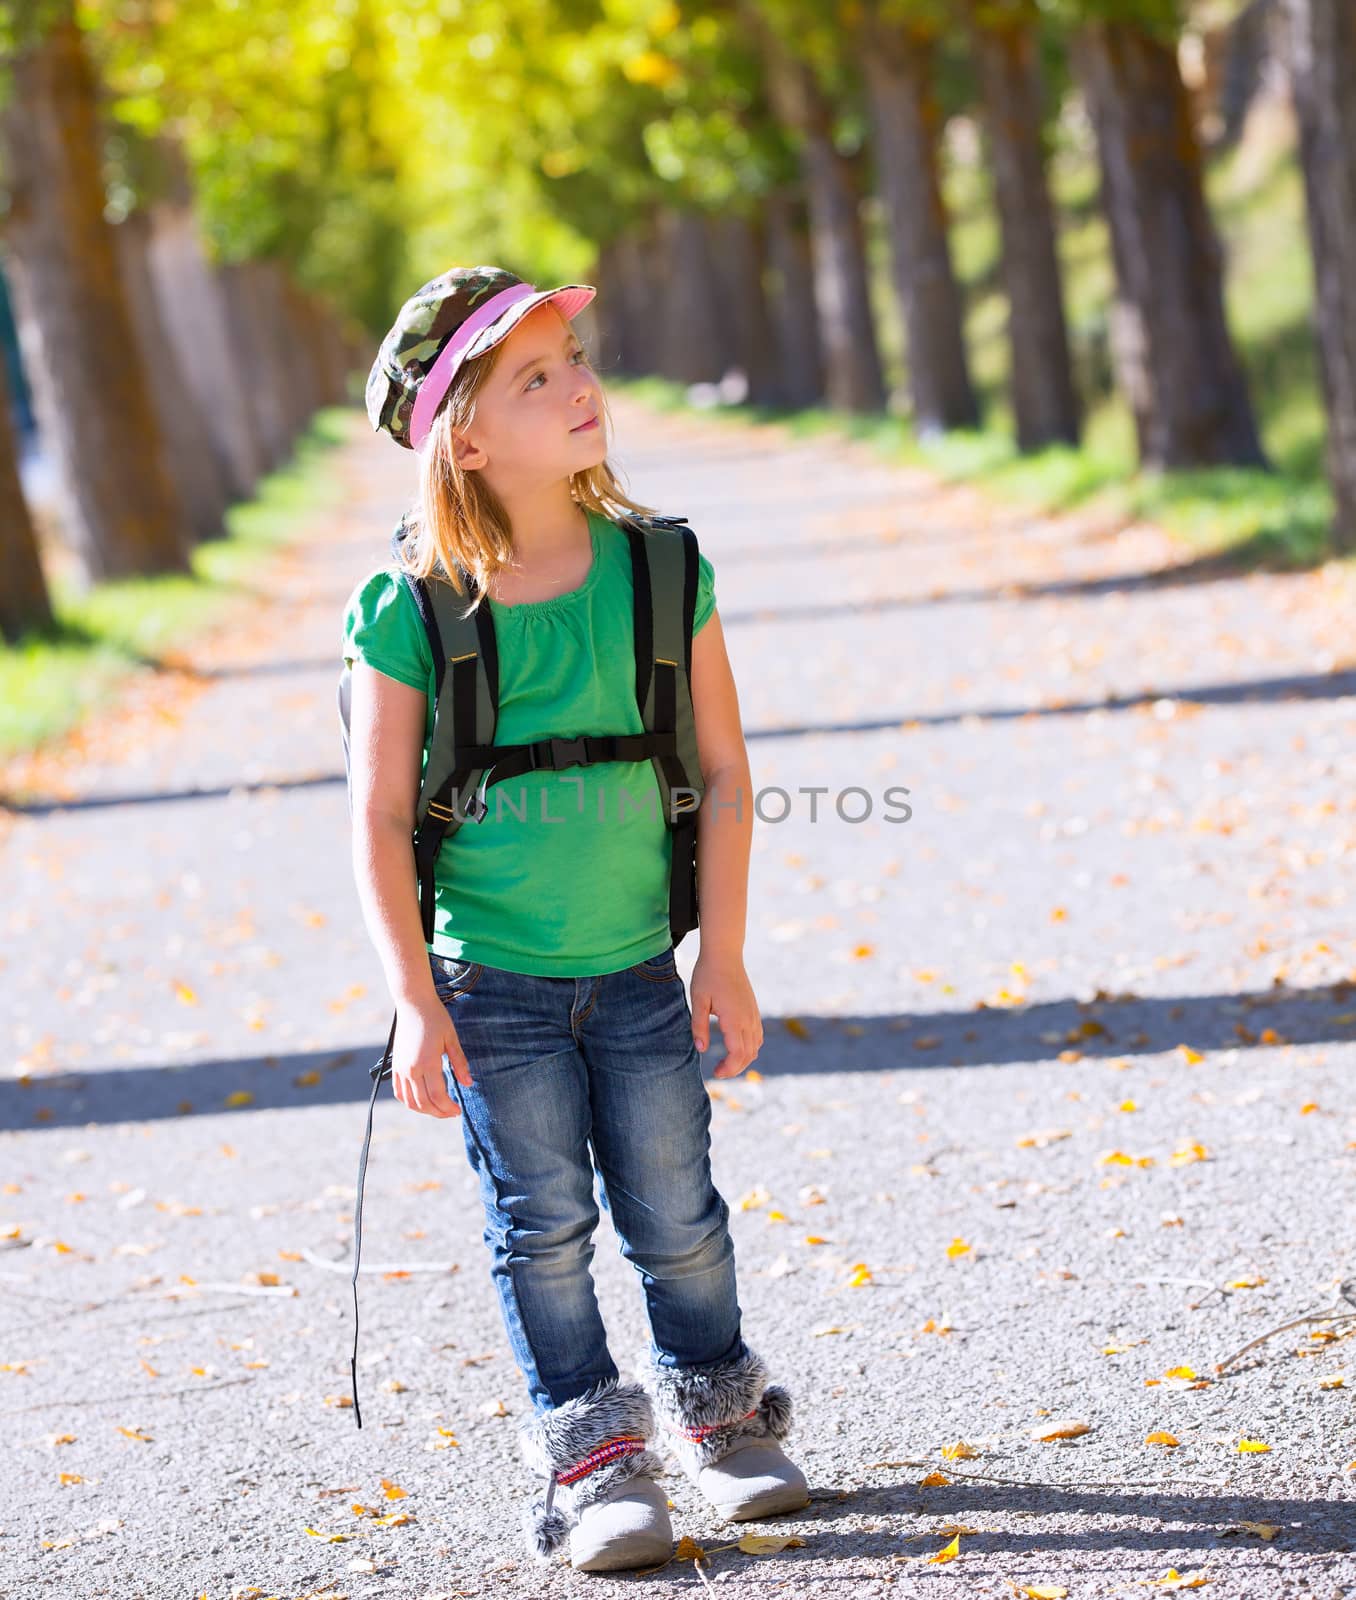 Blond explorer kid girl walking with backpack in autumn trees track